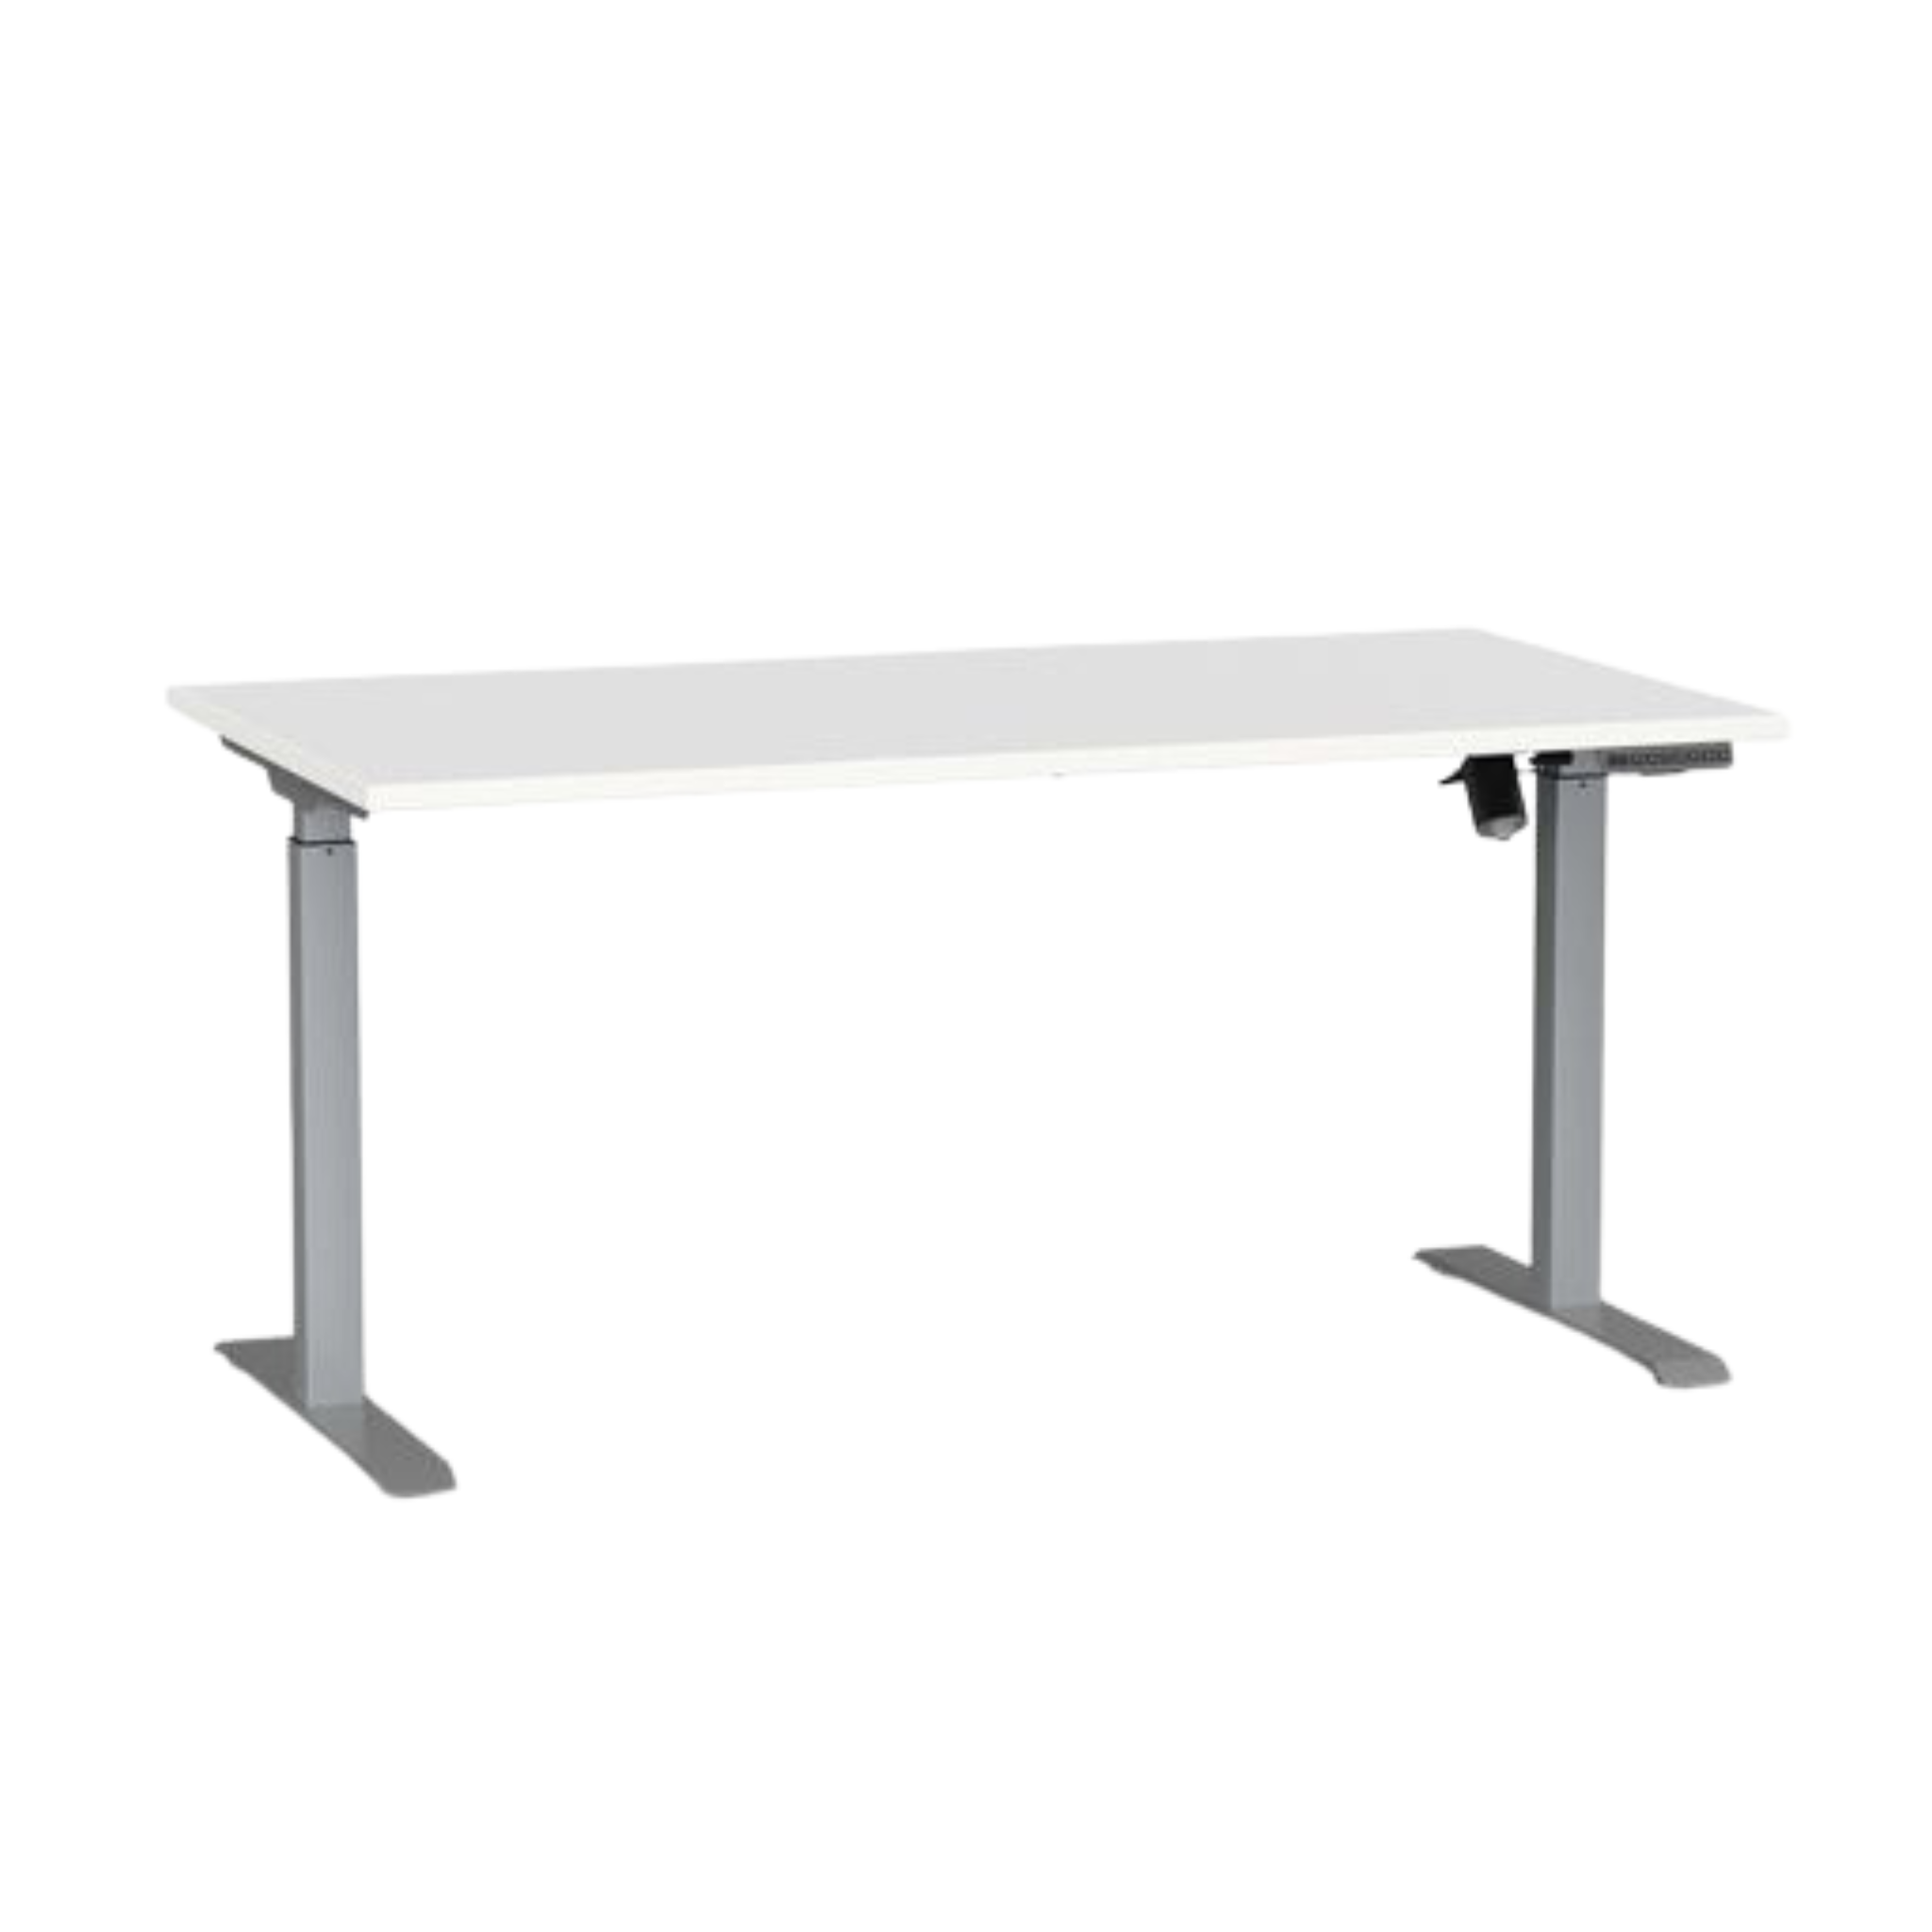 Agile boost electric sit to stand desk with silver frame and white top